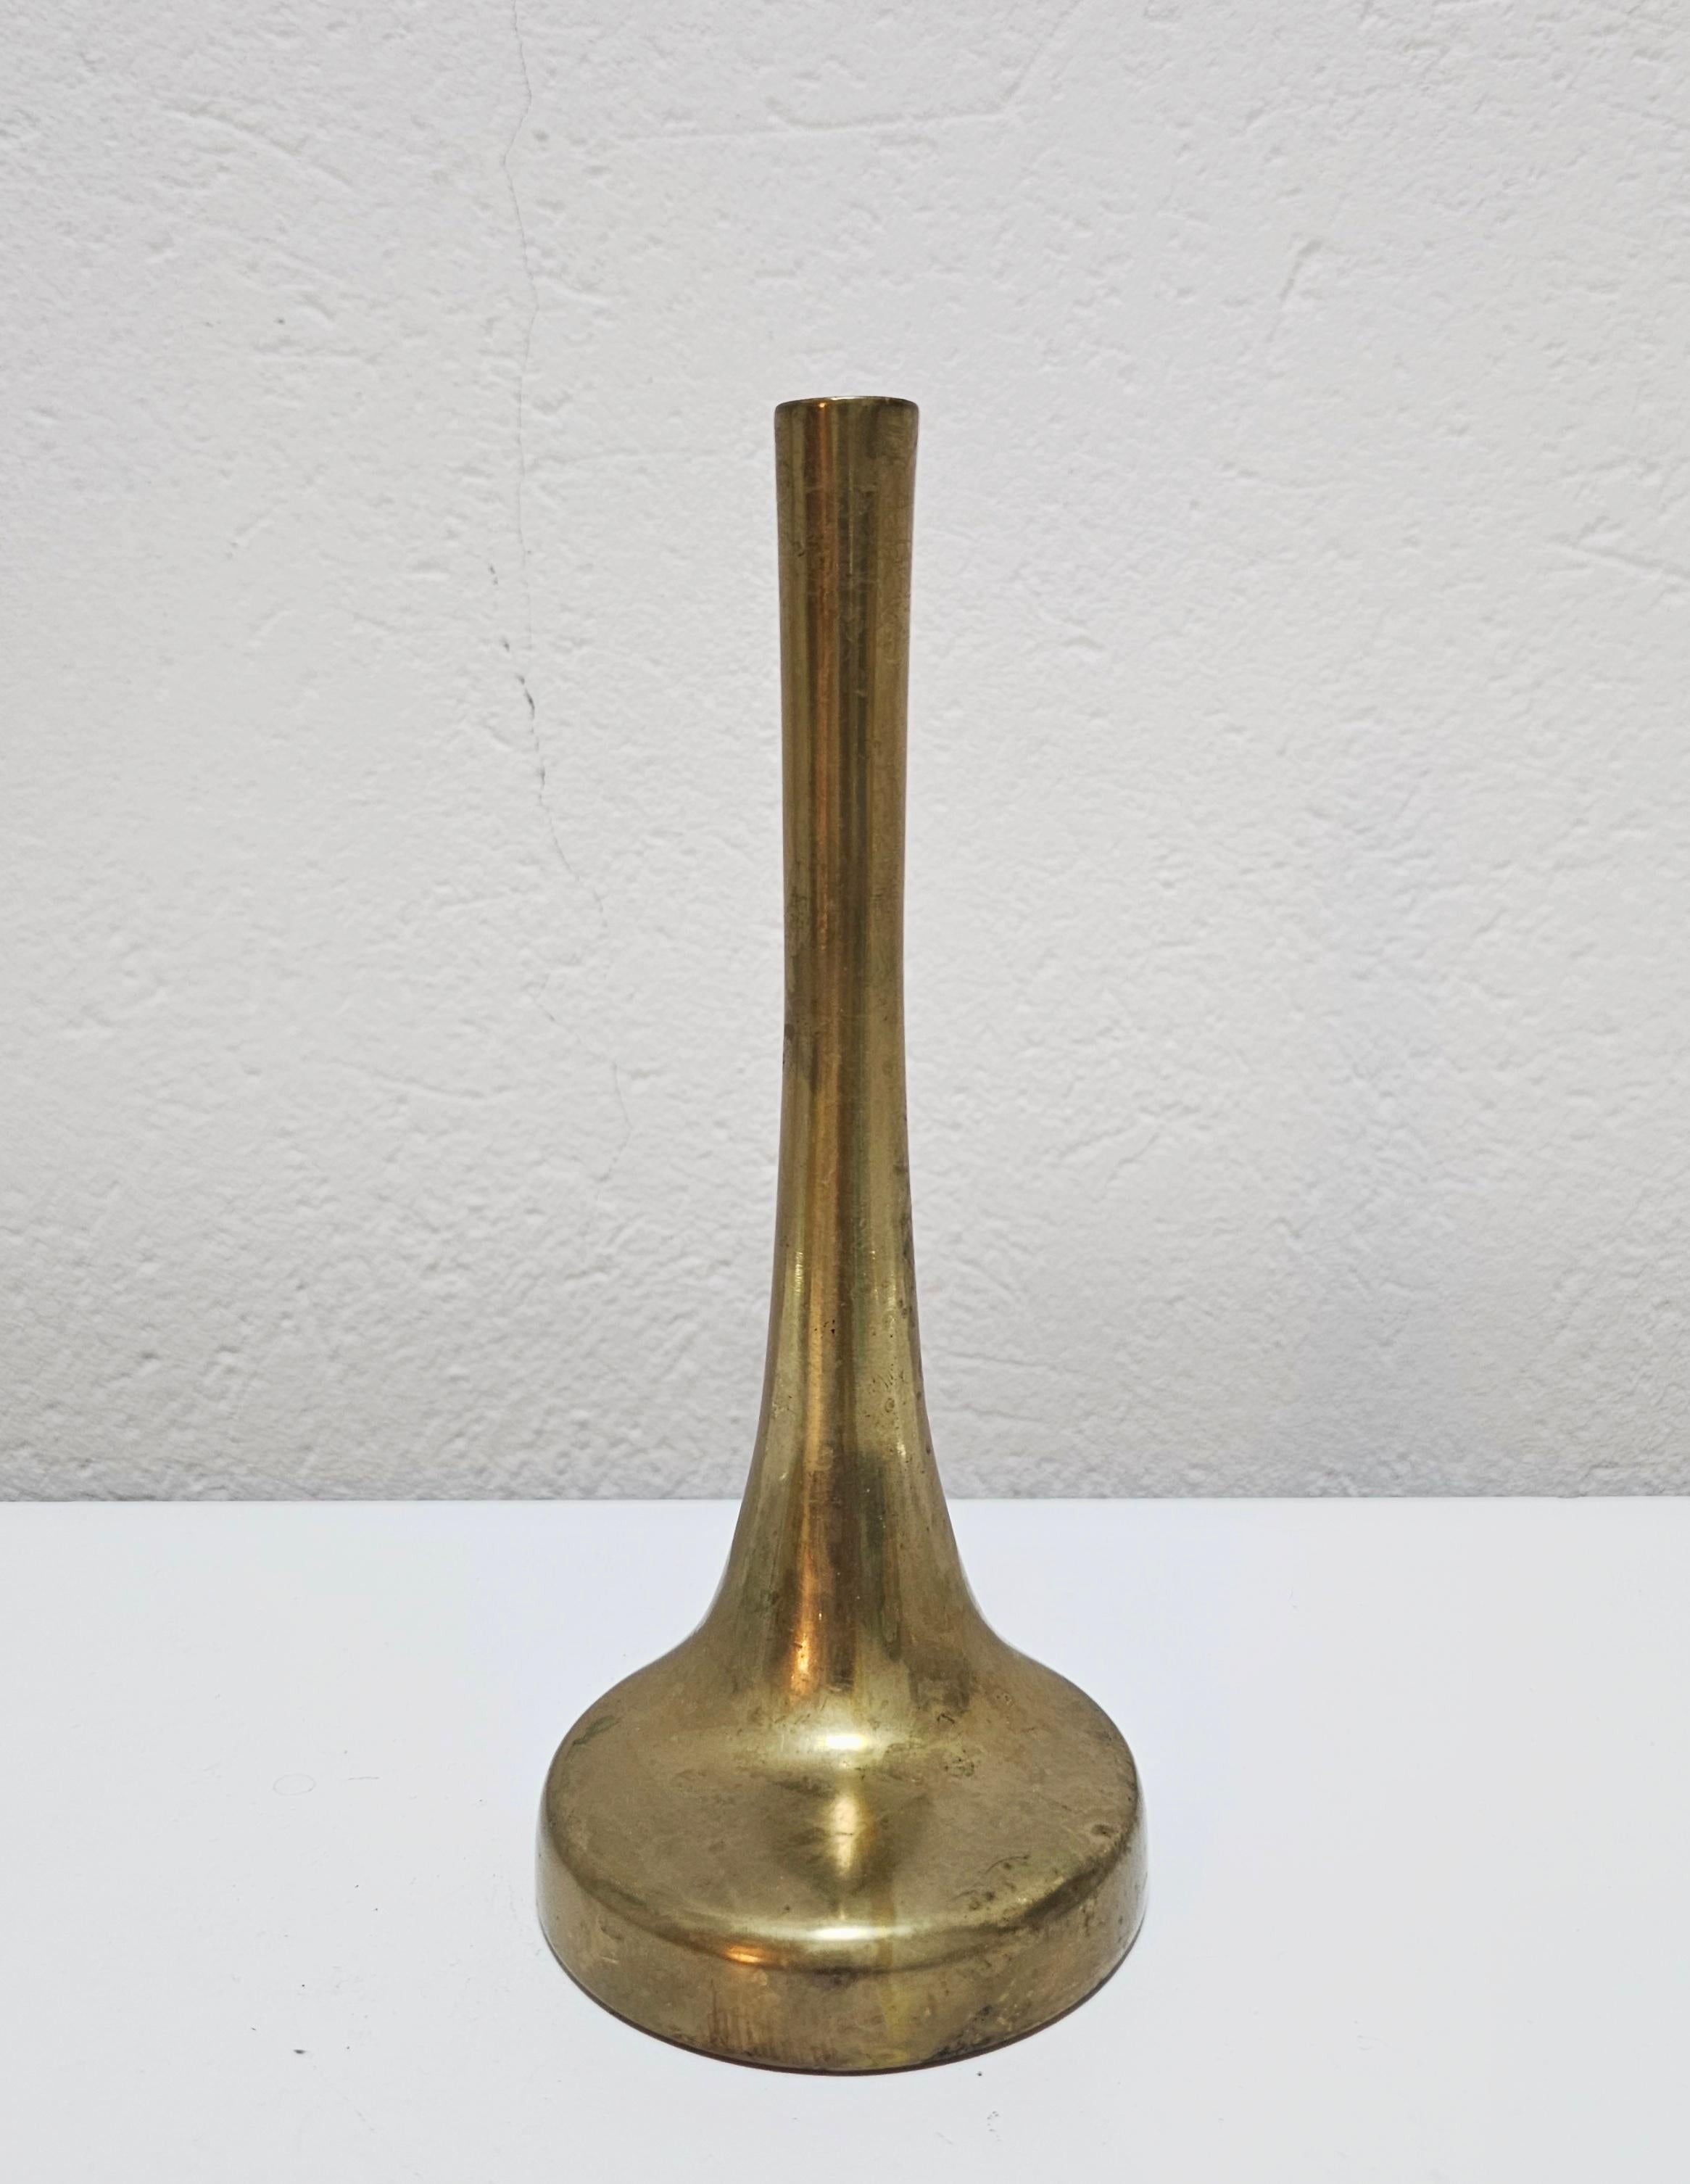 In this listing you will find a very rare and absolutely extraordinary sculptural asymmetrical Brutalist vase done in bronze, for a single flower. It was designed by Austrian designer Heinz Goll, who's work is often found at auctions in some of the